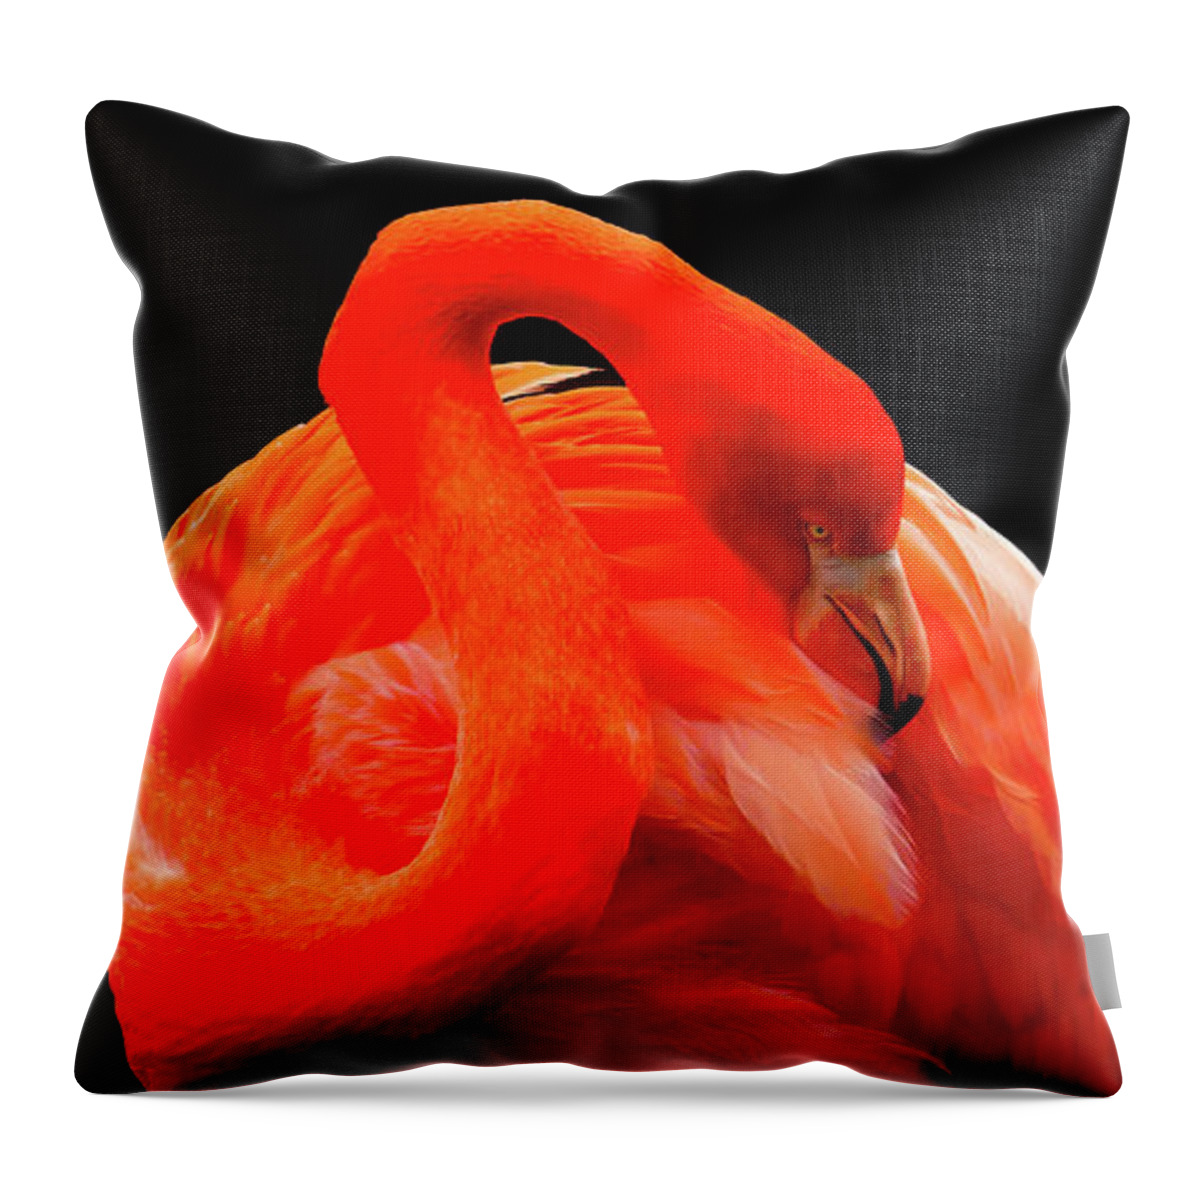 Flamingo Throw Pillow featuring the photograph Red Flamingo Art Photography - Birds Wall Art Prints by Wall Art Prints